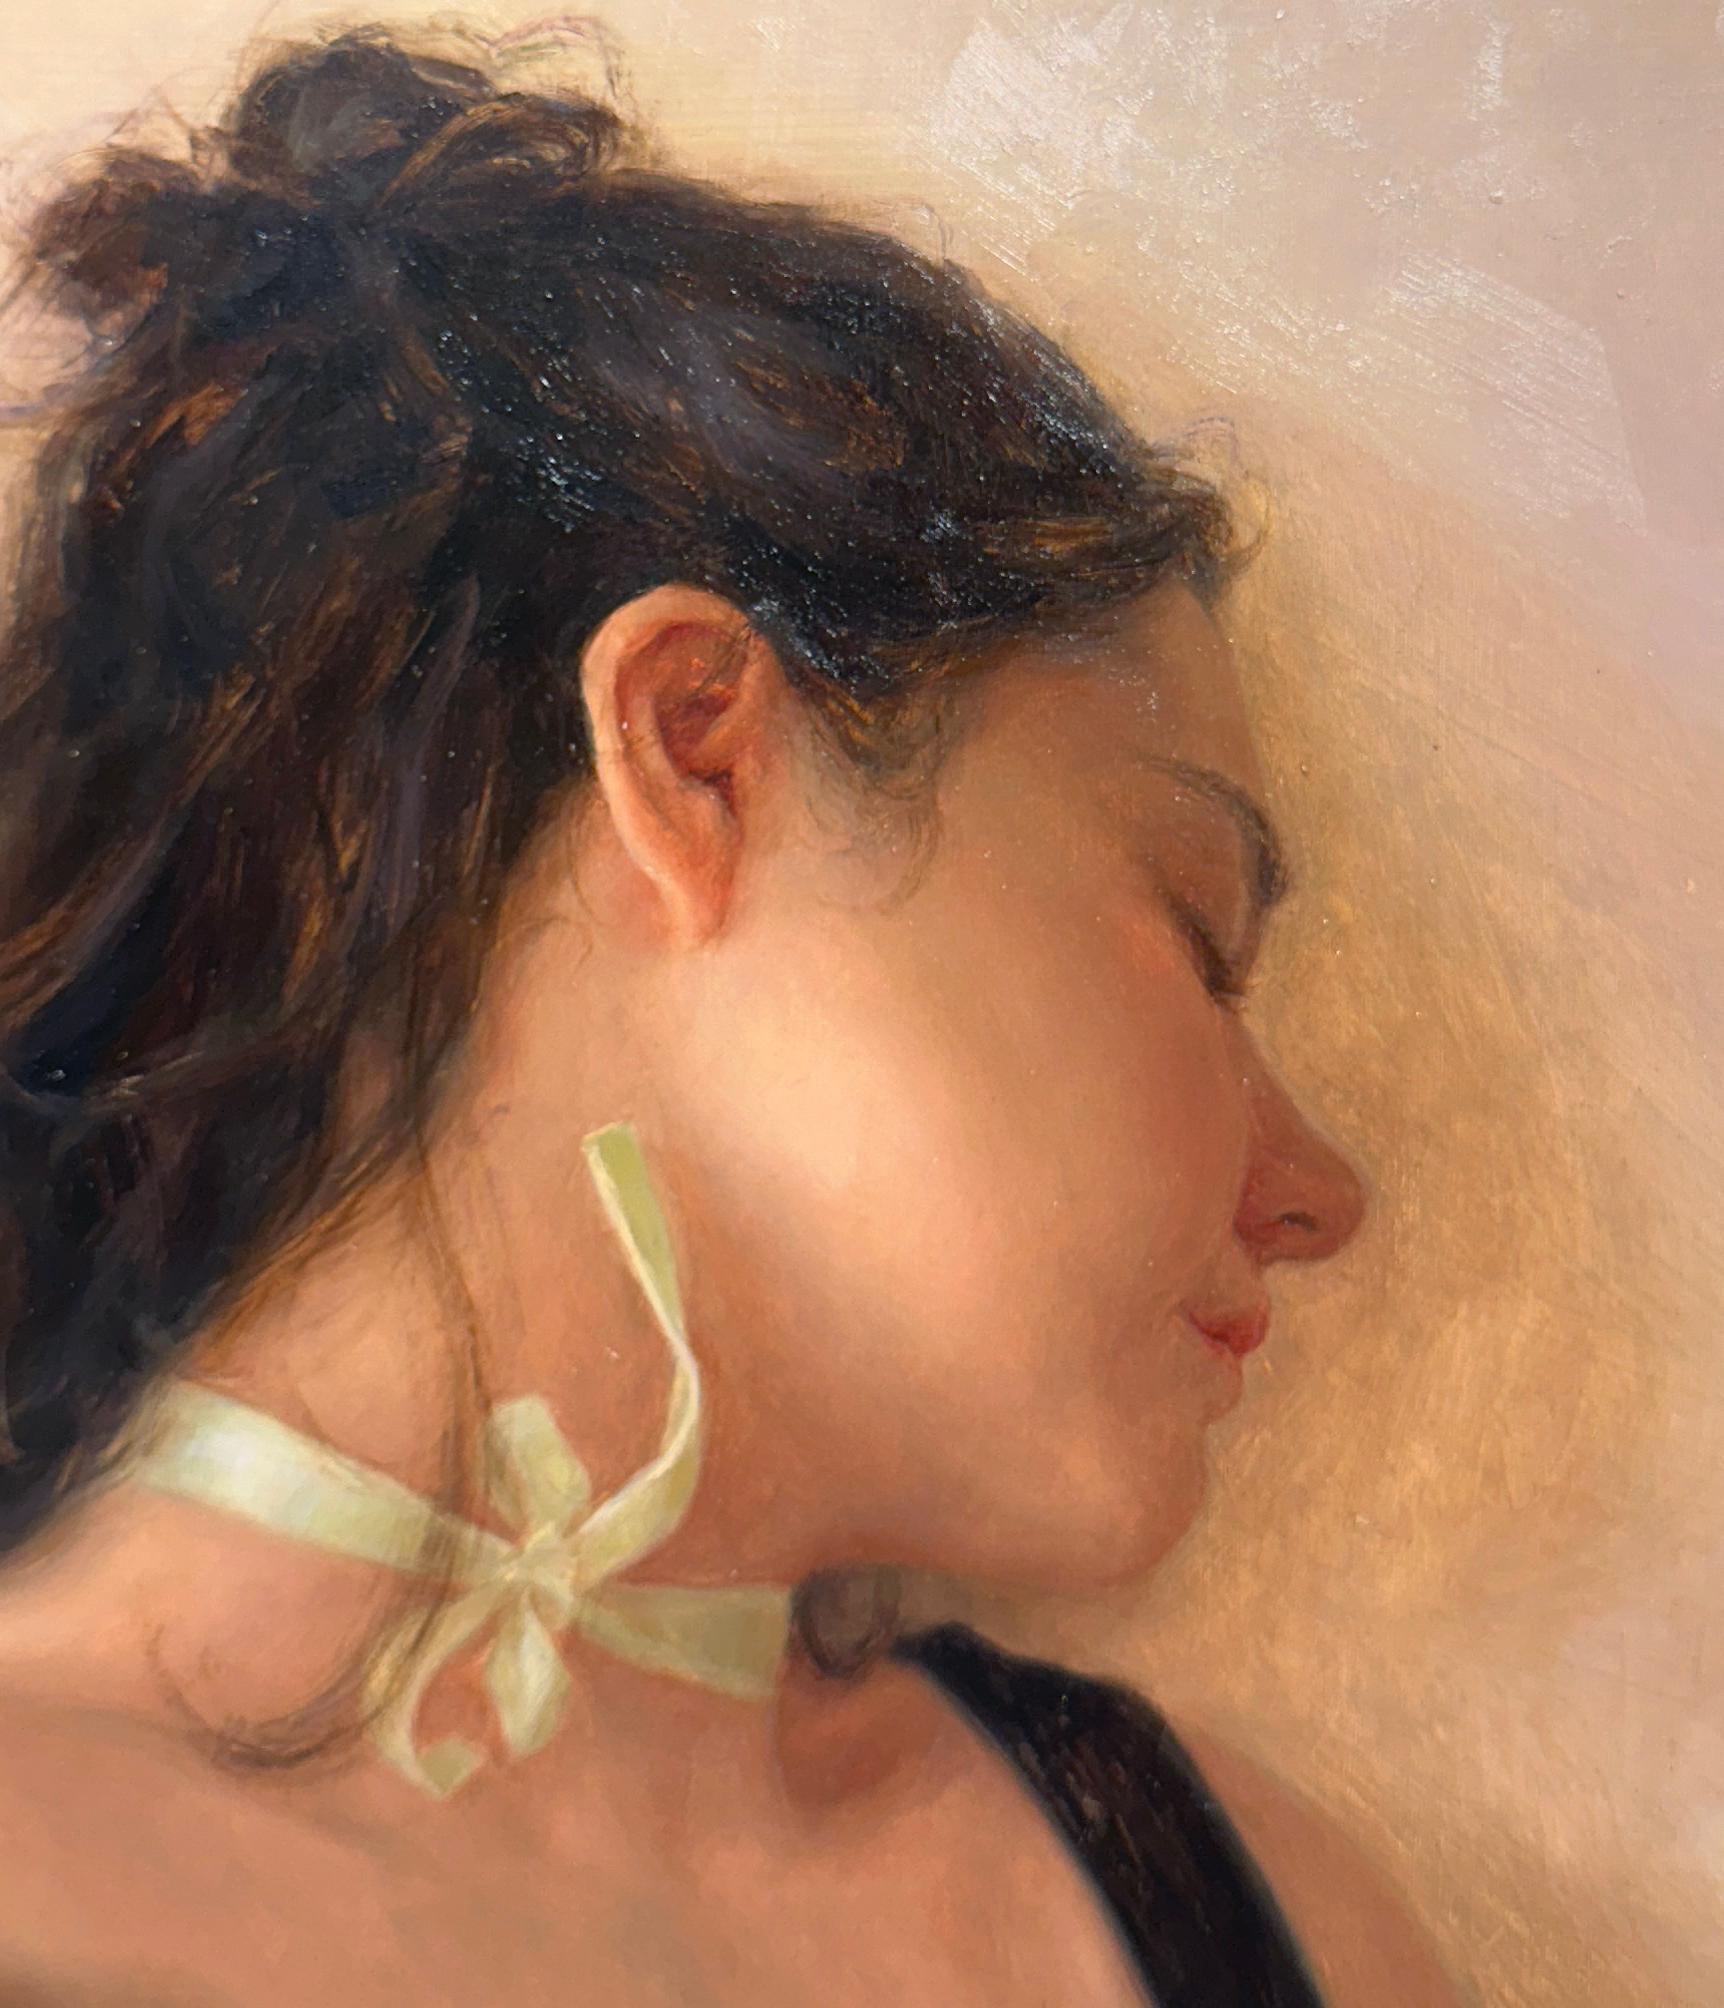 The Girl with the Green Ribbon - Contemplative Female Figure, Oil on Panel For Sale 2